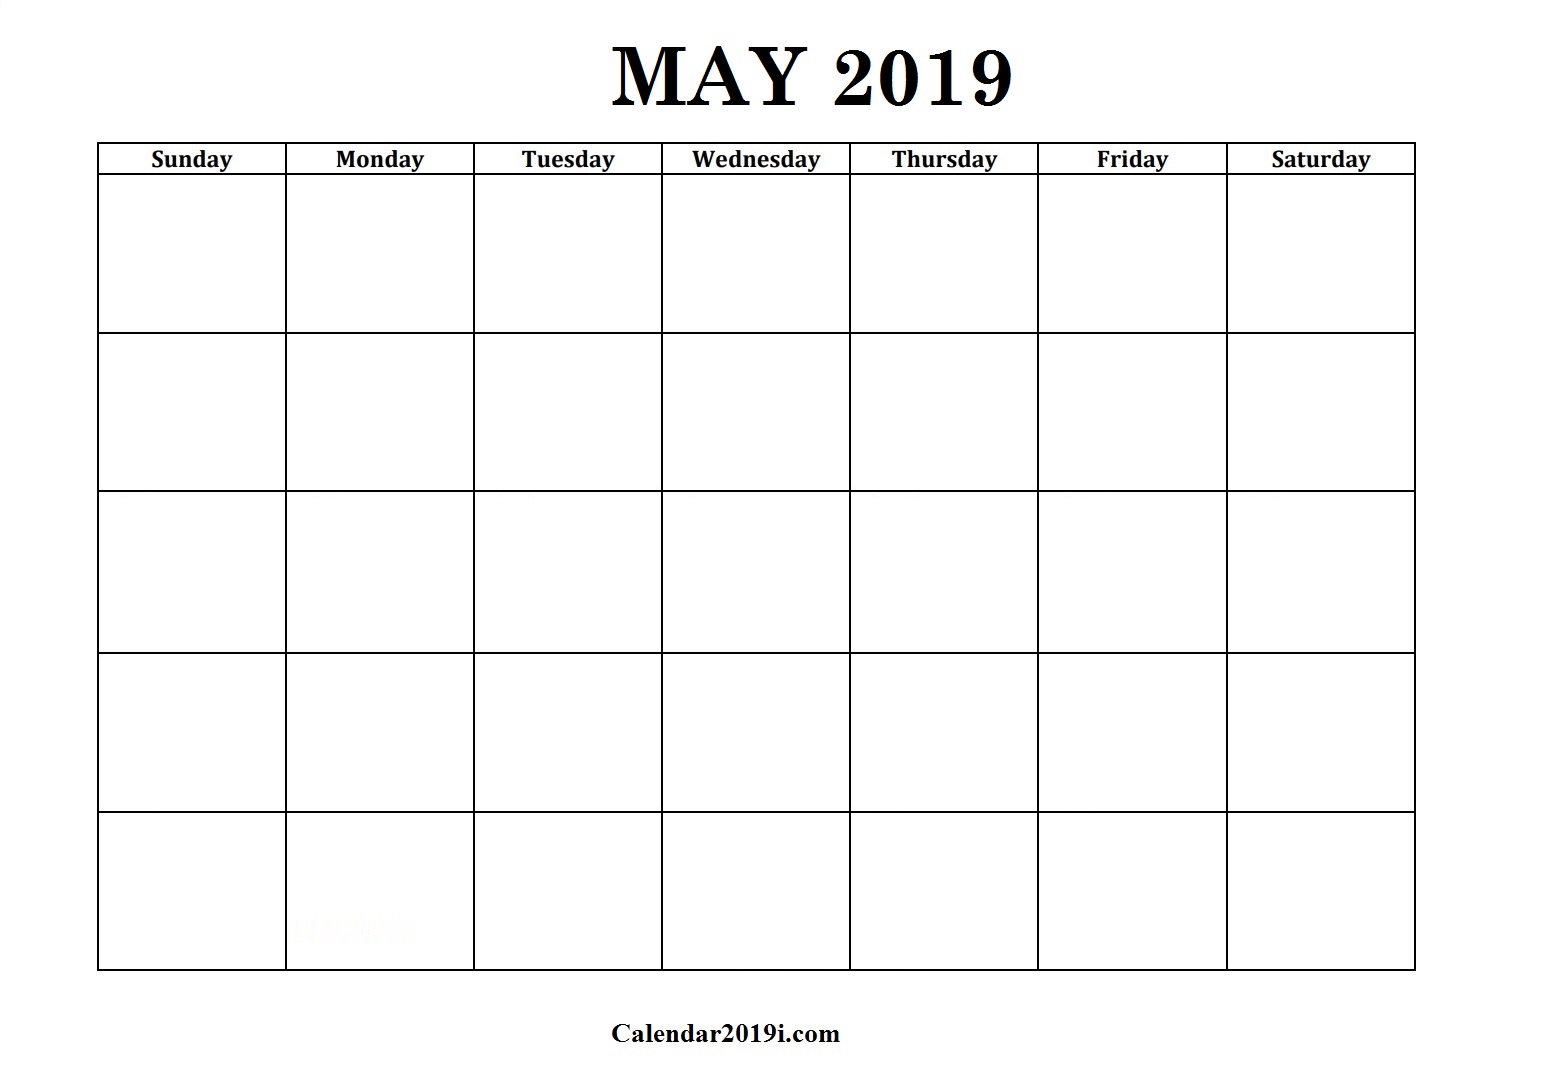 May 2019 Blank Planner